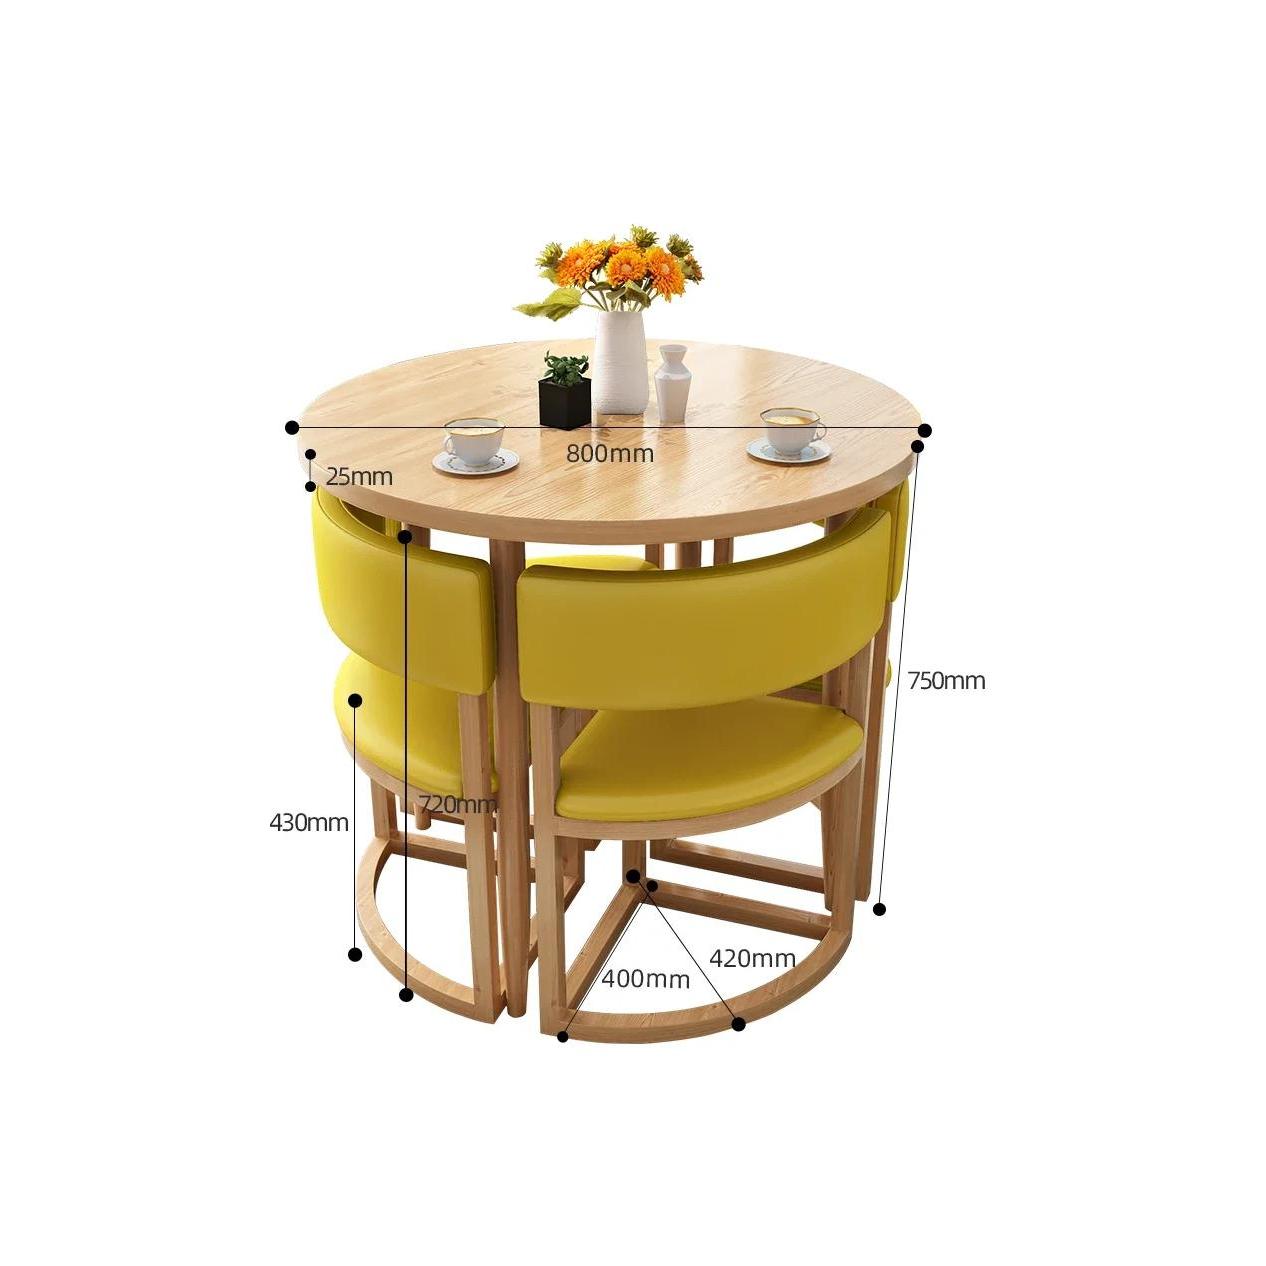 Round Mobile Dining Tables Set Kitchen 4 Chairs Center Wood Table Extendable Luxury Floor Mesa Comedor Home Furniture GPF26XP